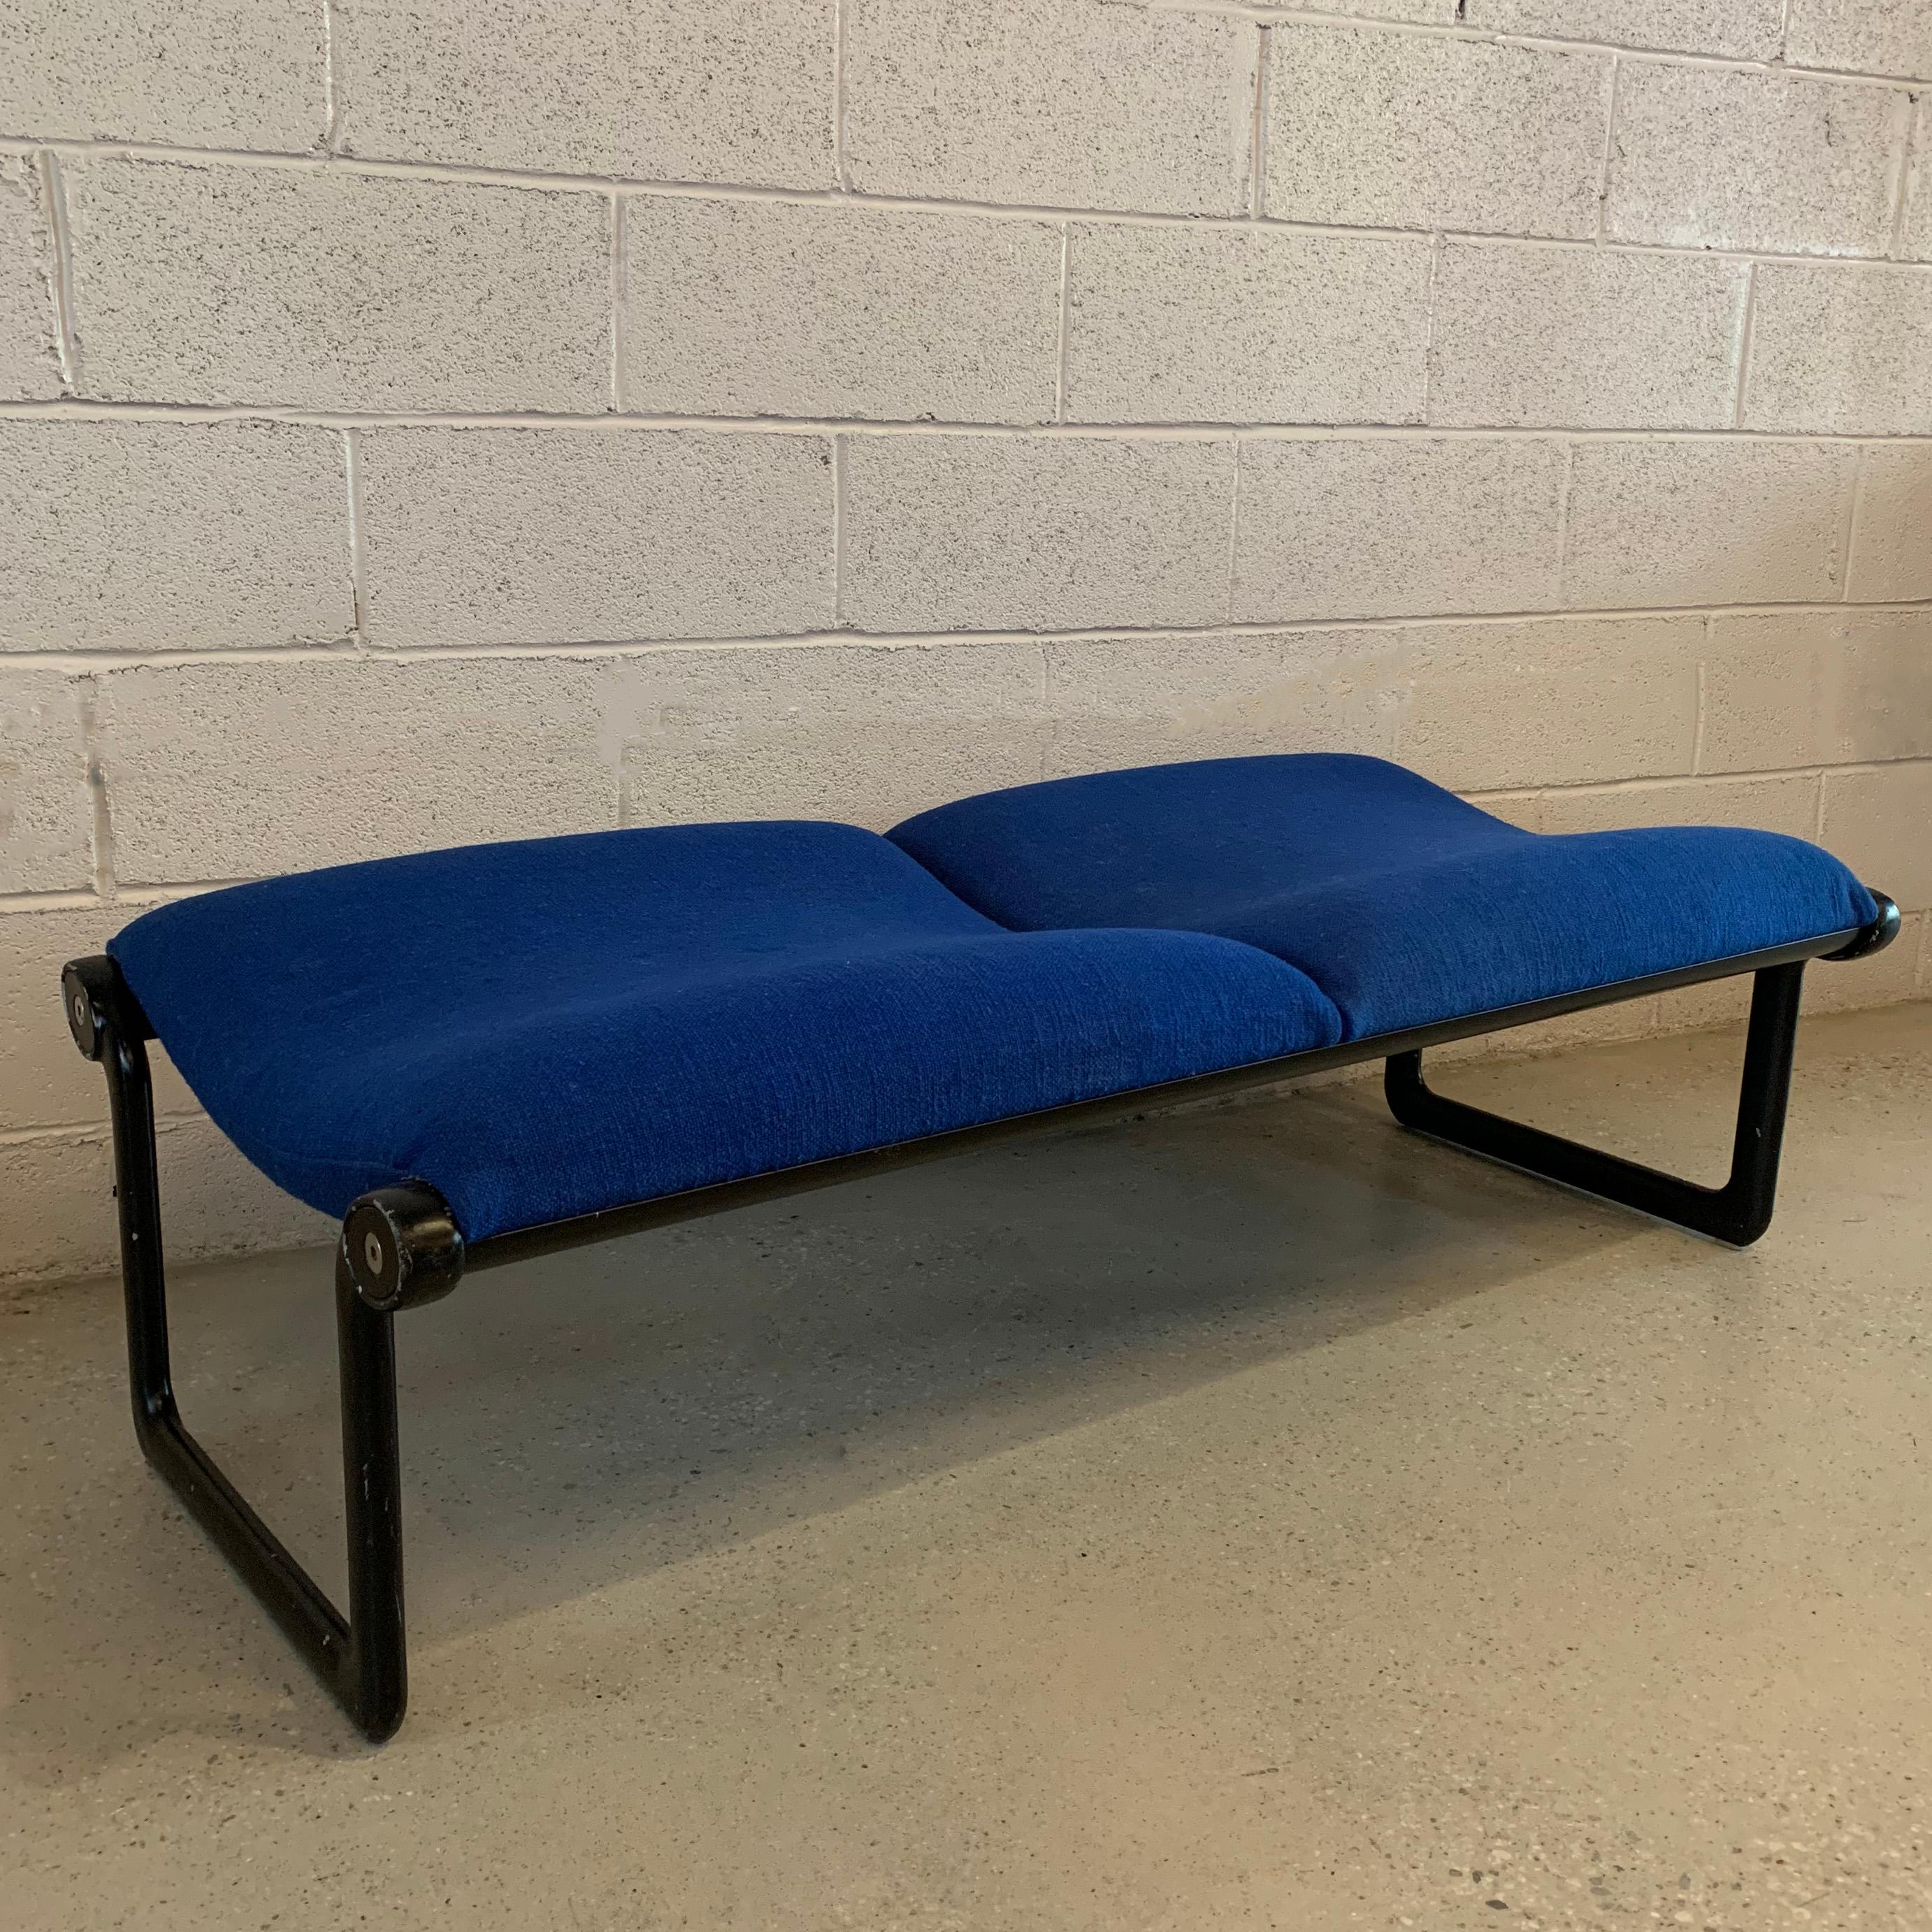 Mid-Century Modern, sling bench by Bruce Hannah & Andrew Morrison for Knoll features original blue wool upholstery with a painted black steel sling frame.